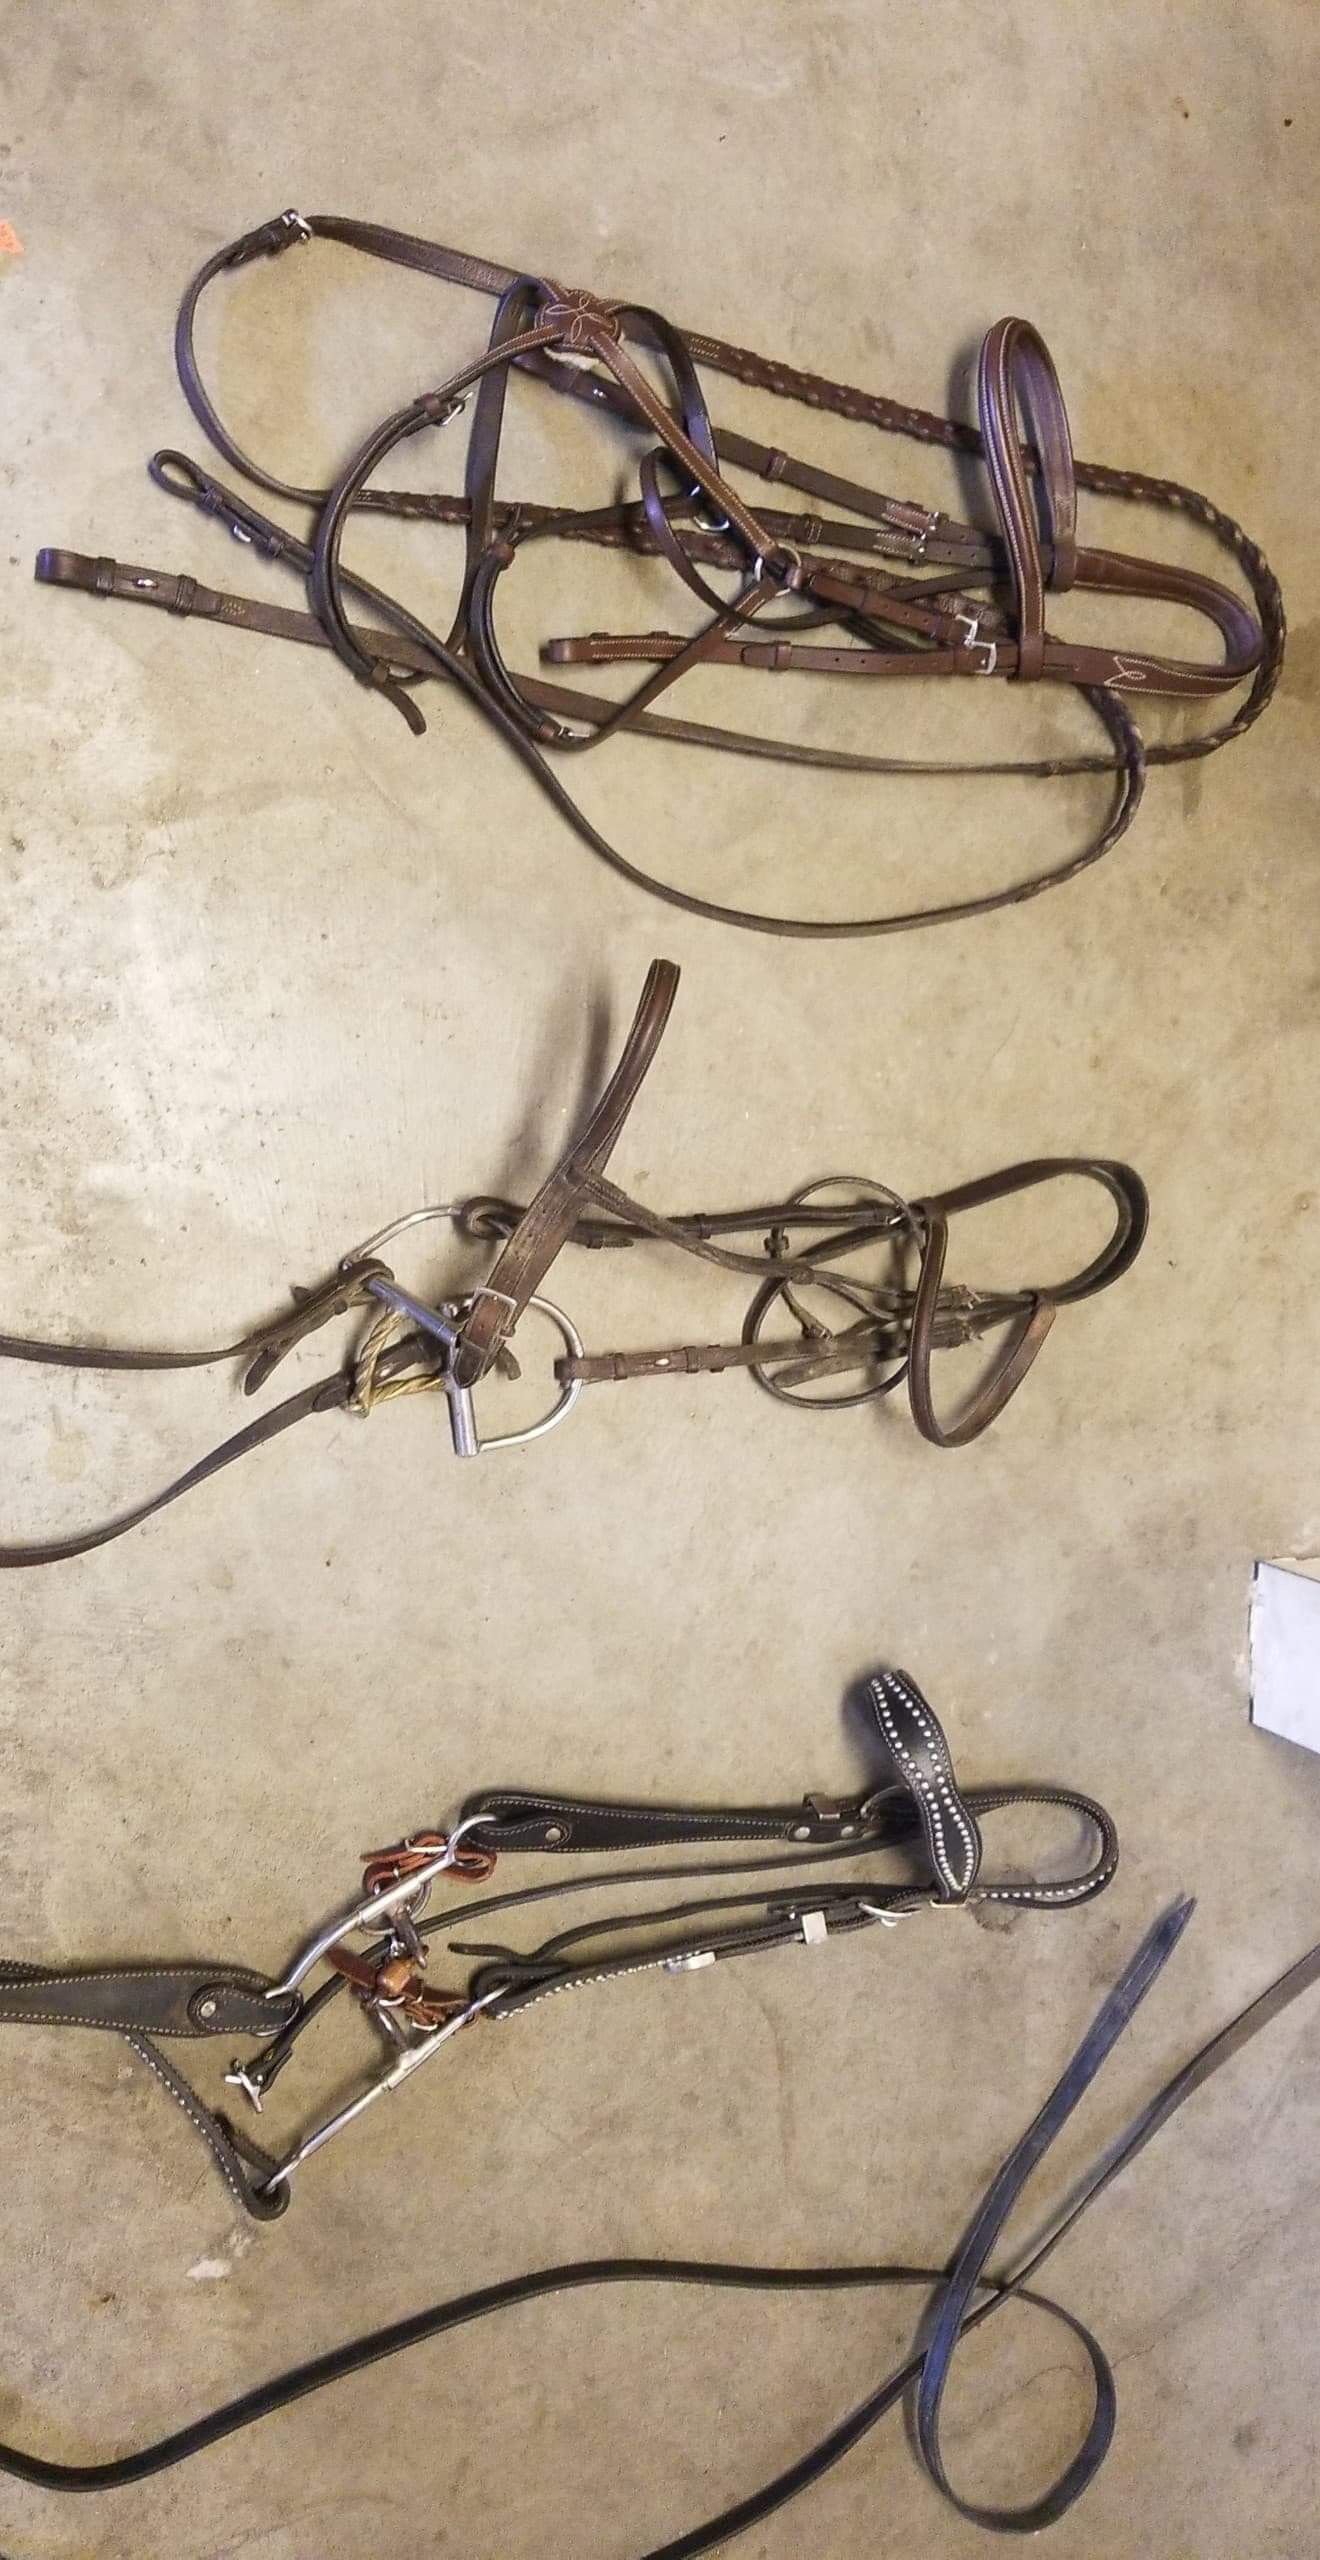 3 different bridle